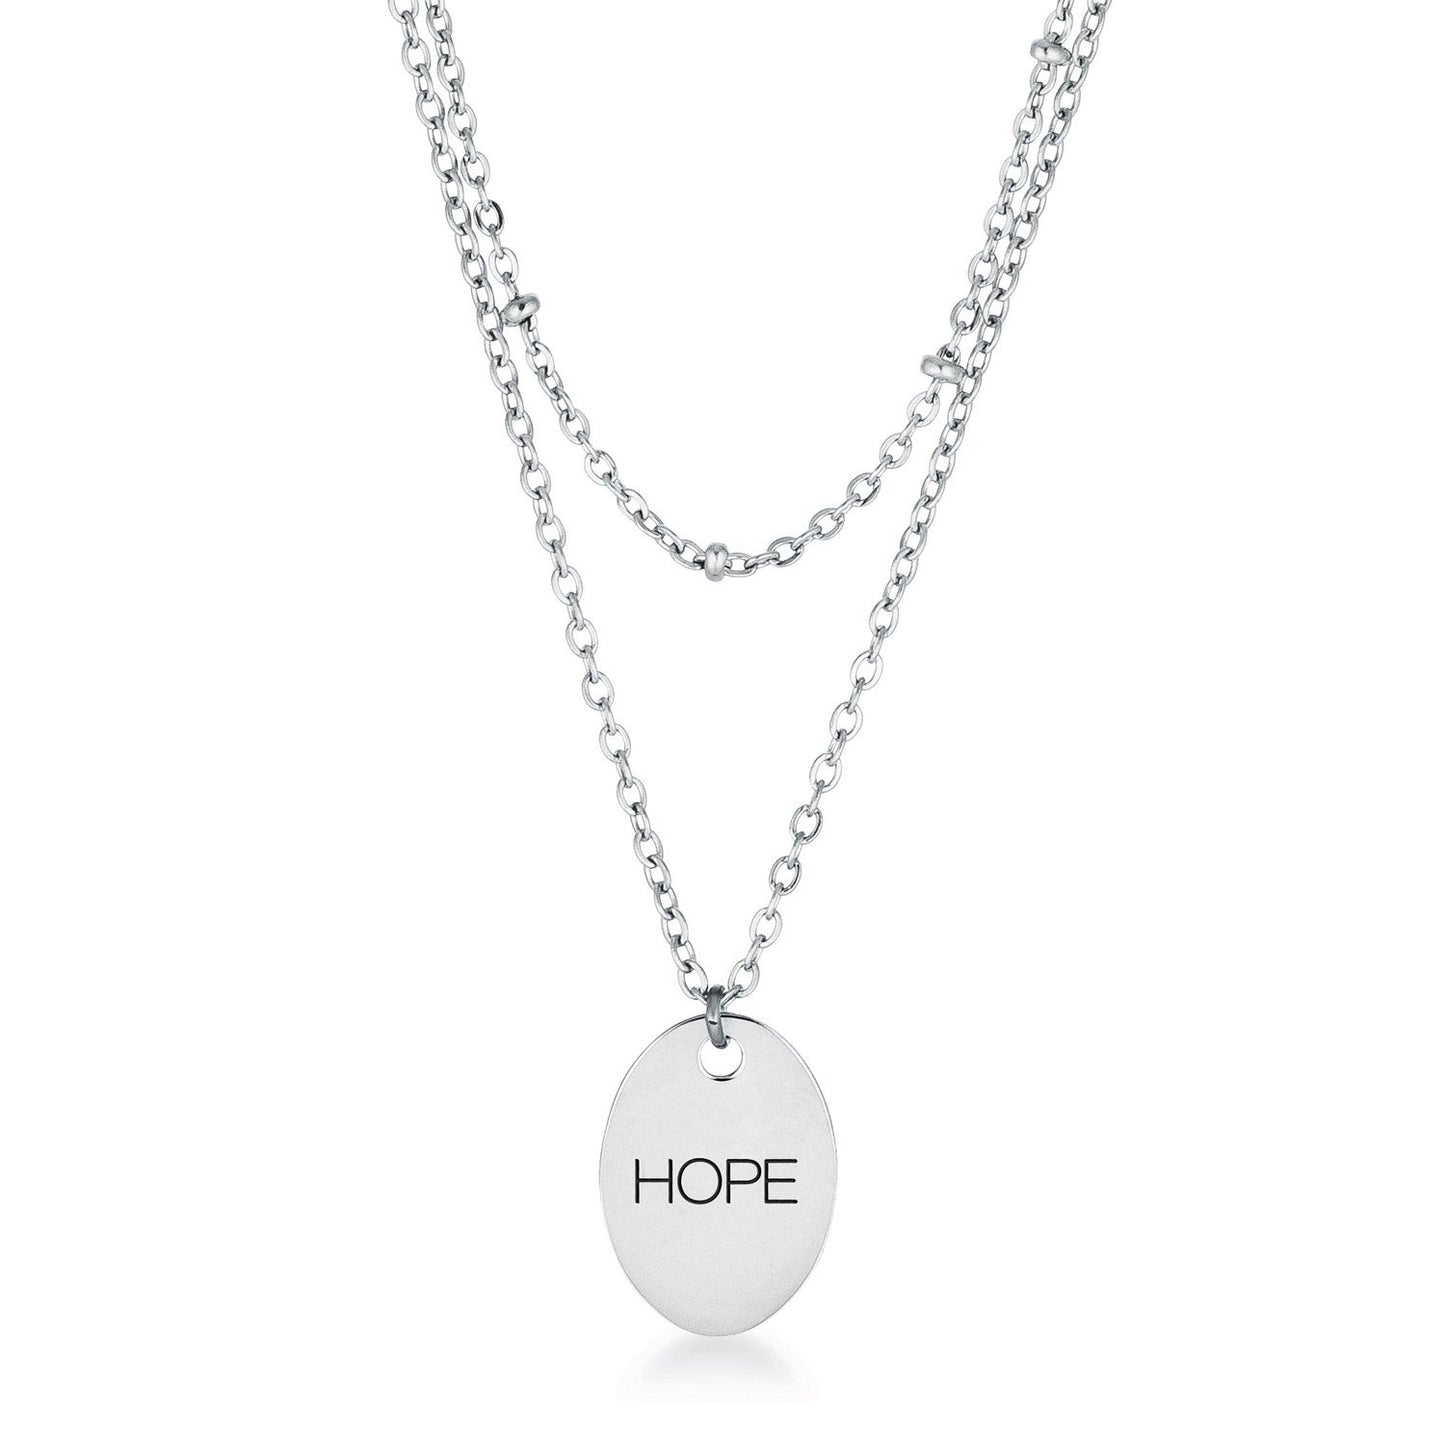 Stainless Steel Double Chain HOPE Necklace